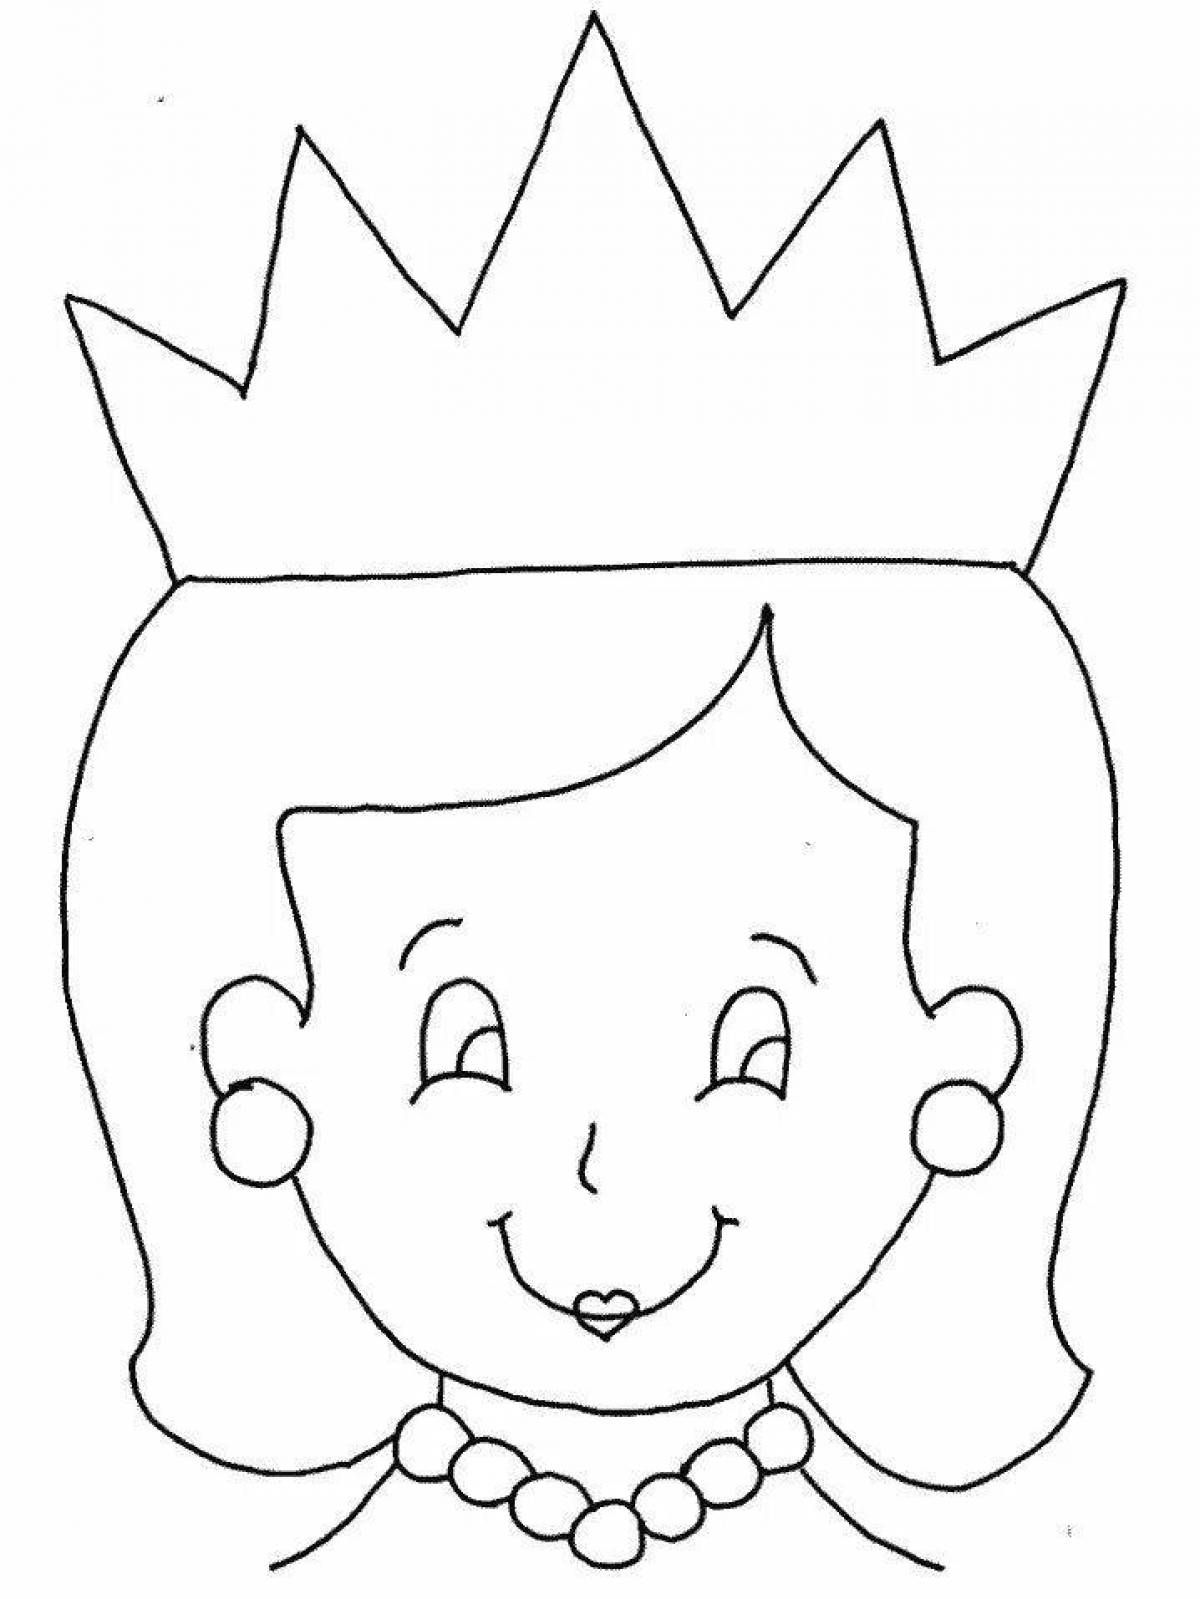 Shining queen coloring book for kids